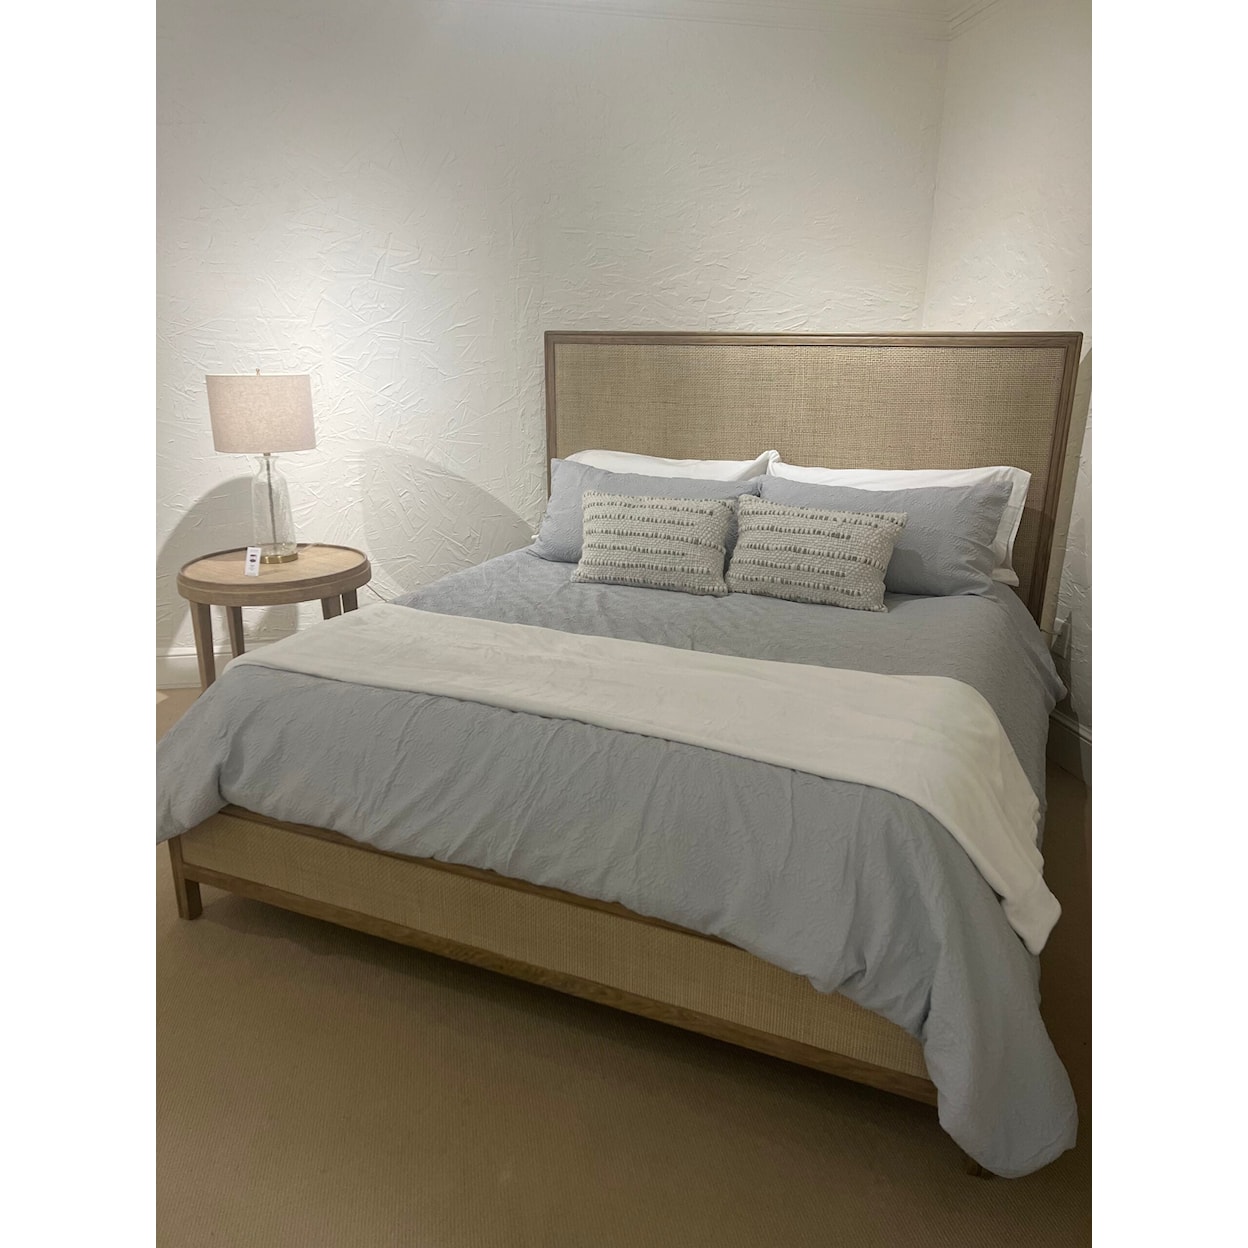 Oliver Home Furnishings Beds/ Bedroom RECTANGLE CANE QUEEN BED